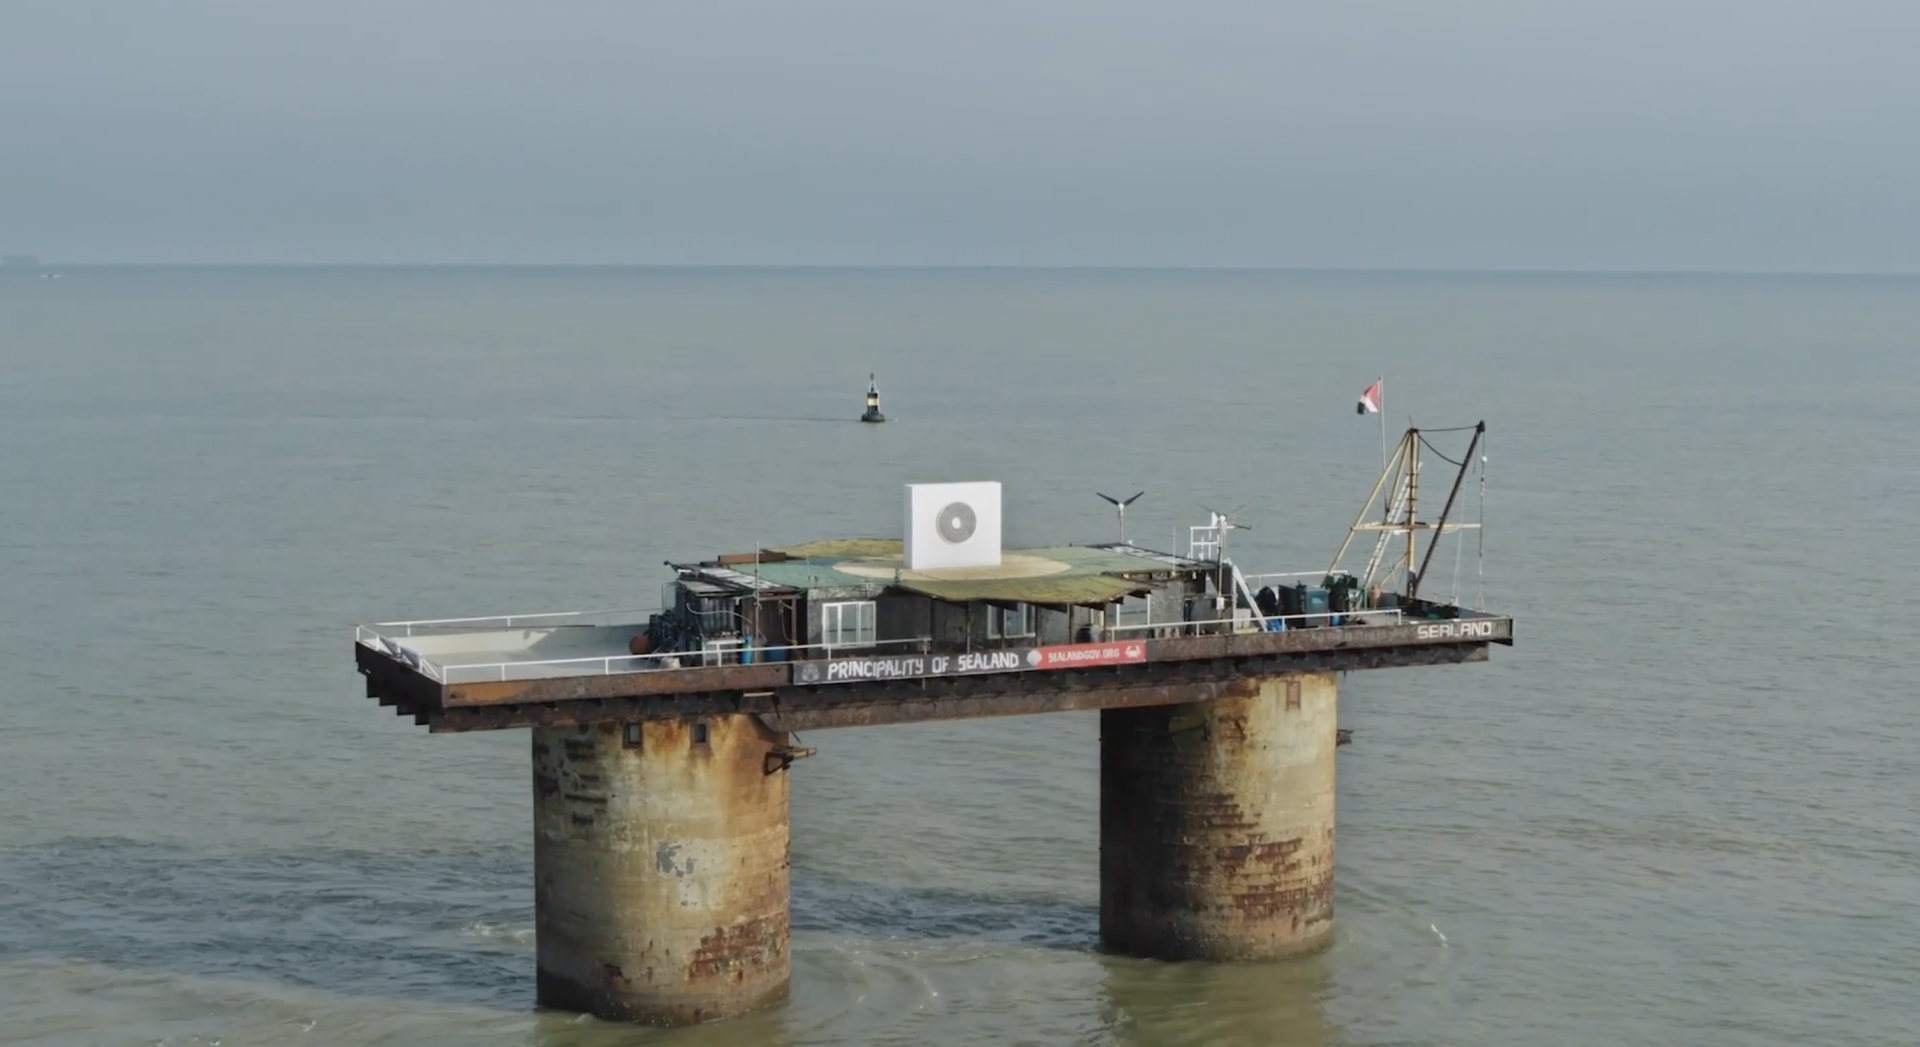 A distant view of a round, gray painting hanging on a white temporary wall, positioned atop a helipad on a platform in the ocean